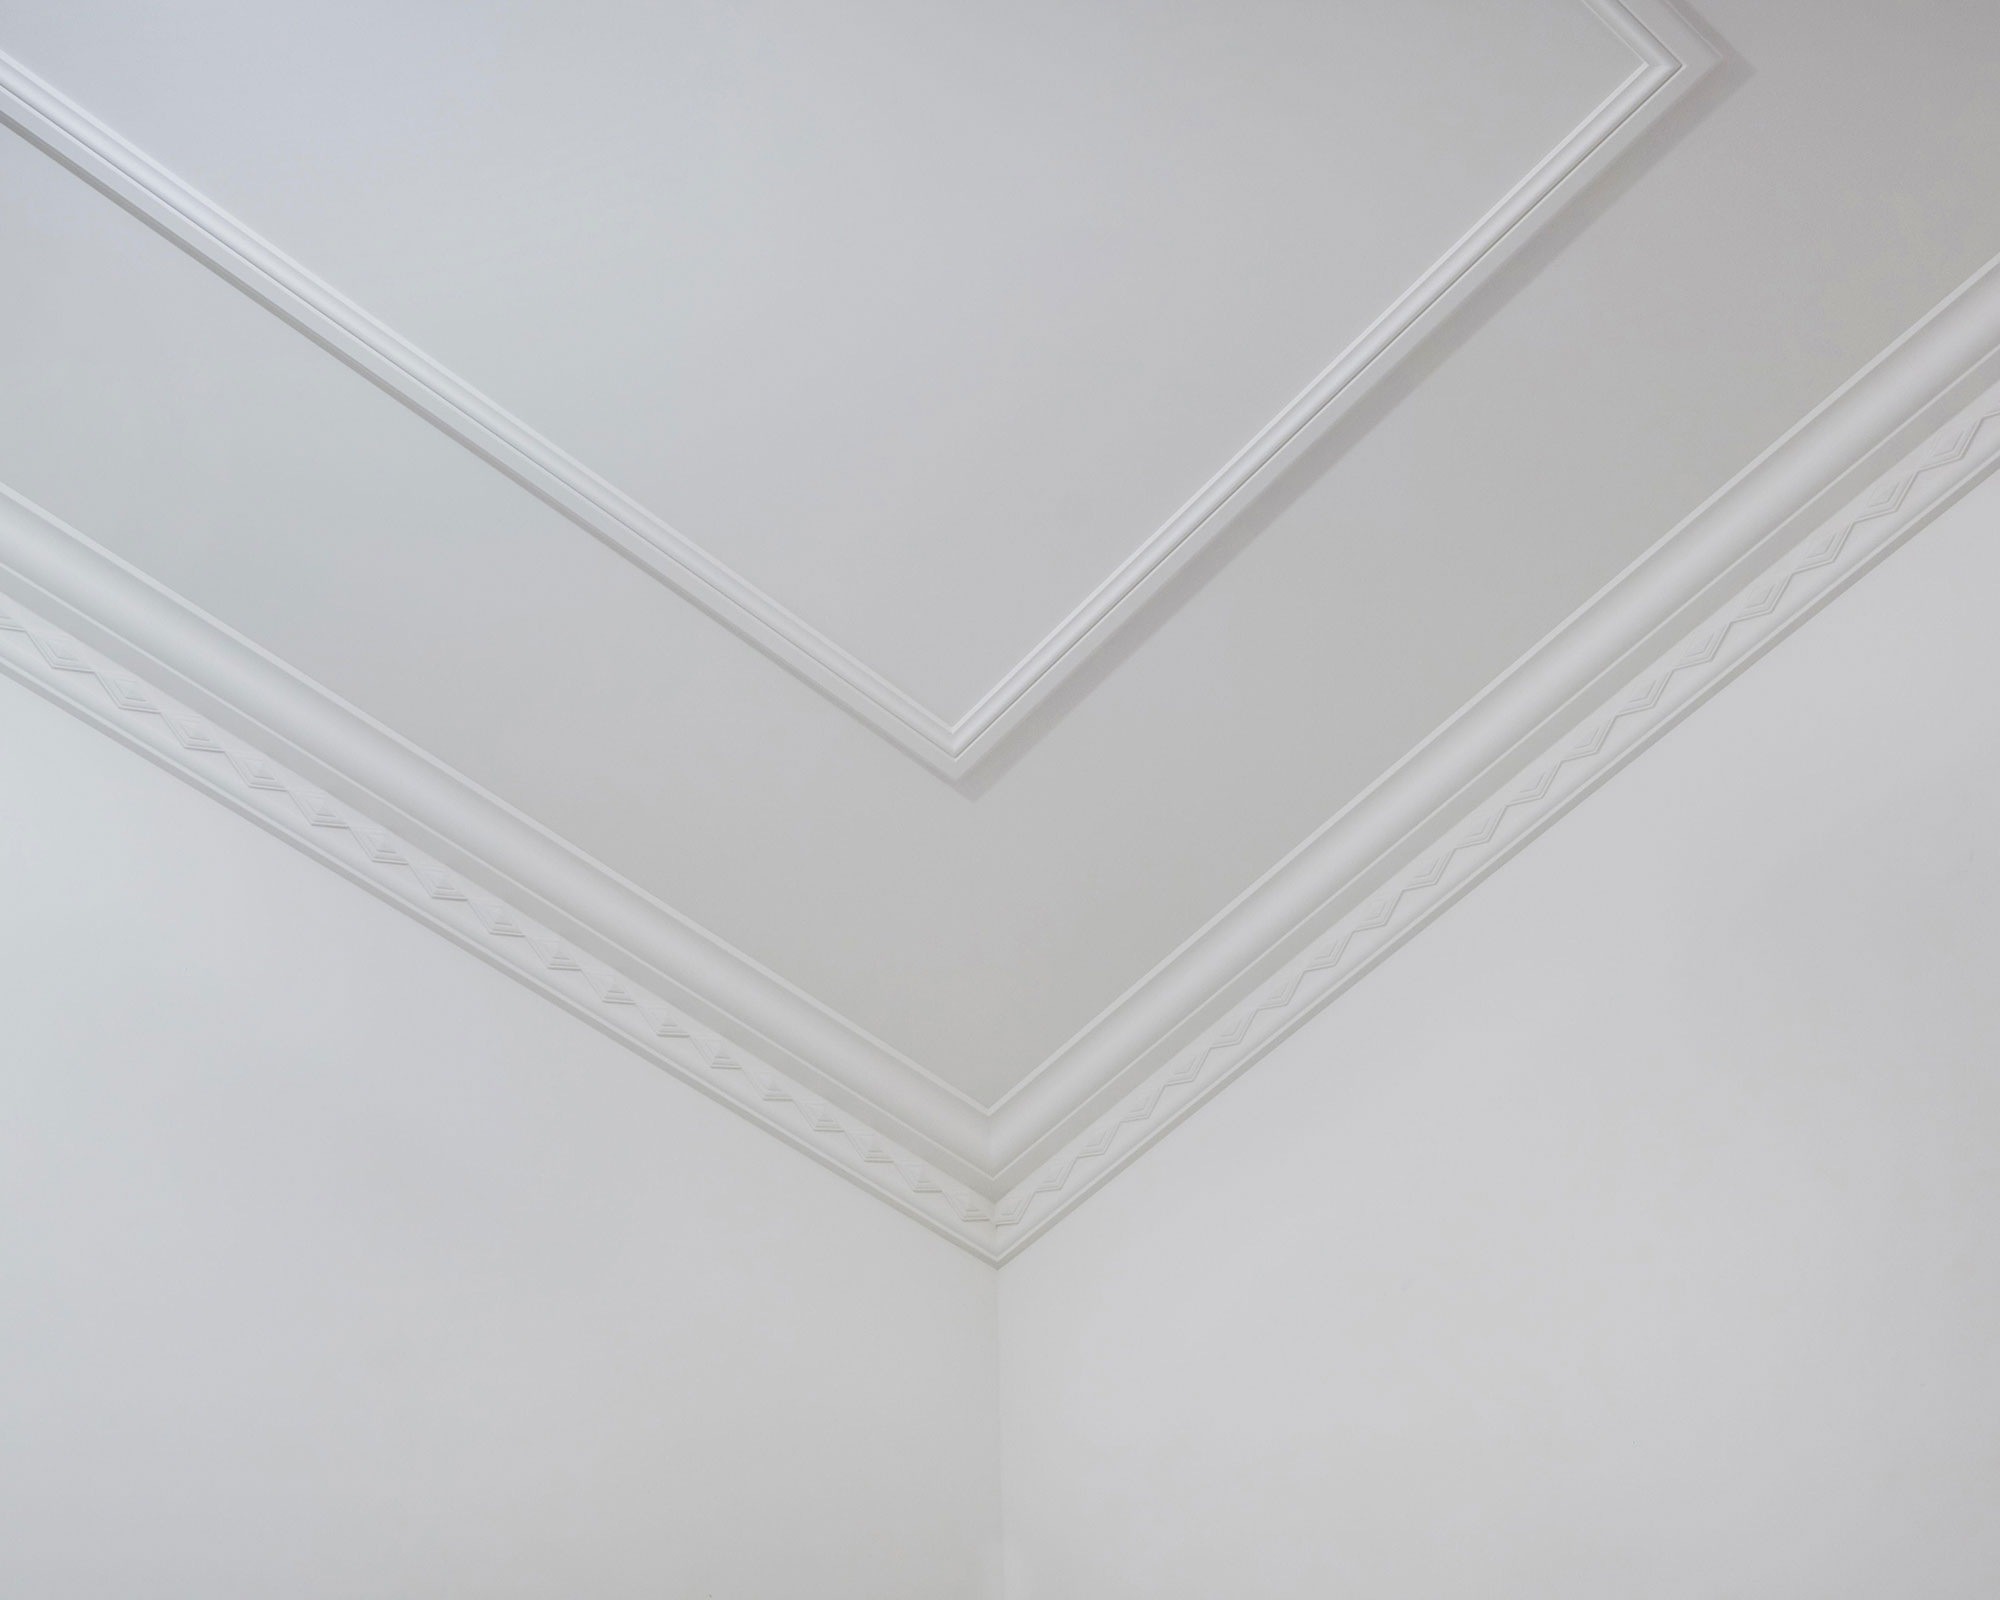 How to cut external coving corners